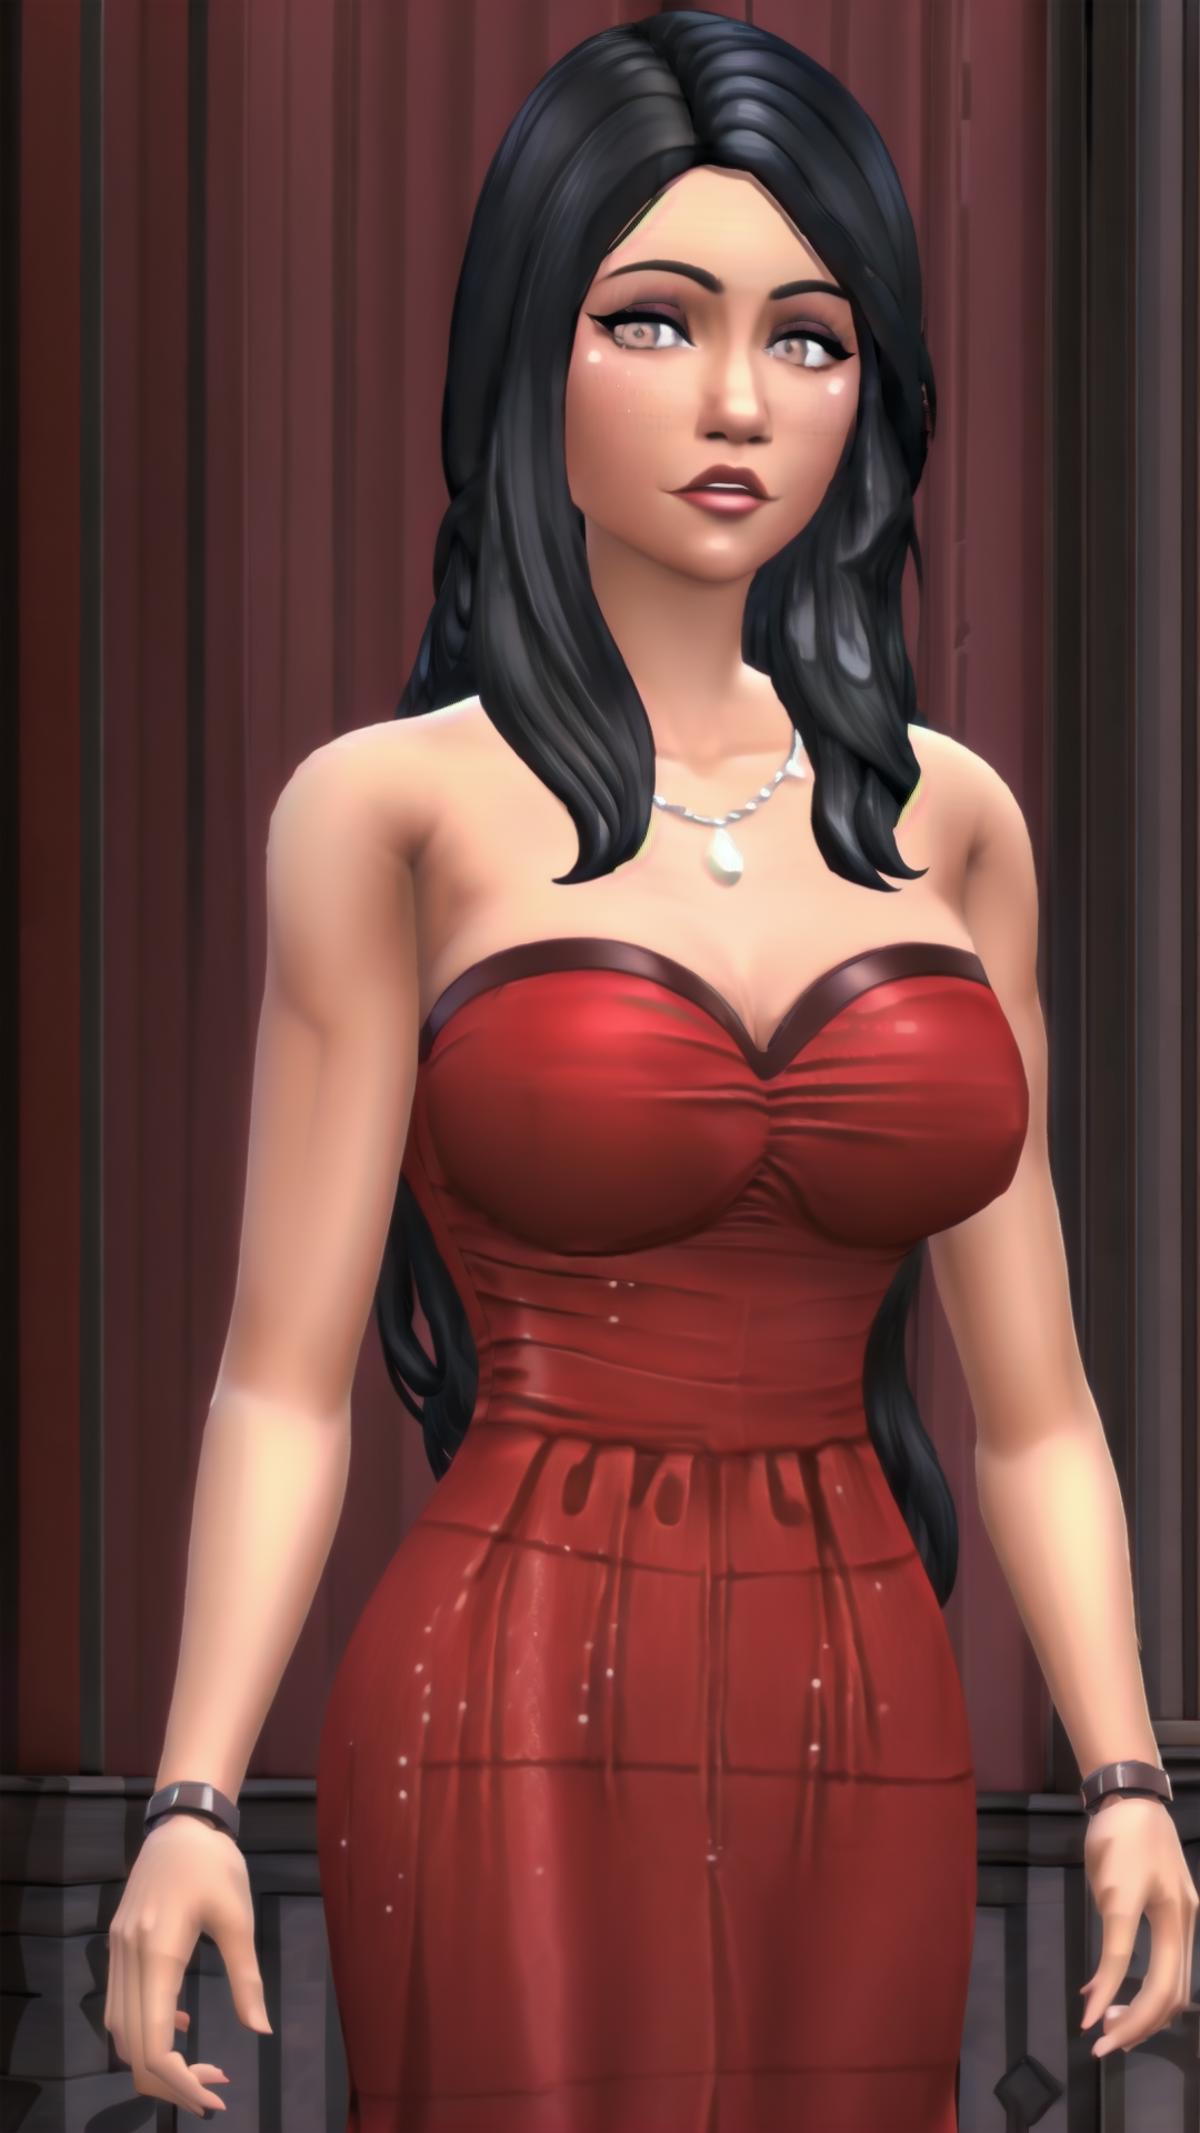 Bella Goth | Sims 4 image by HC94